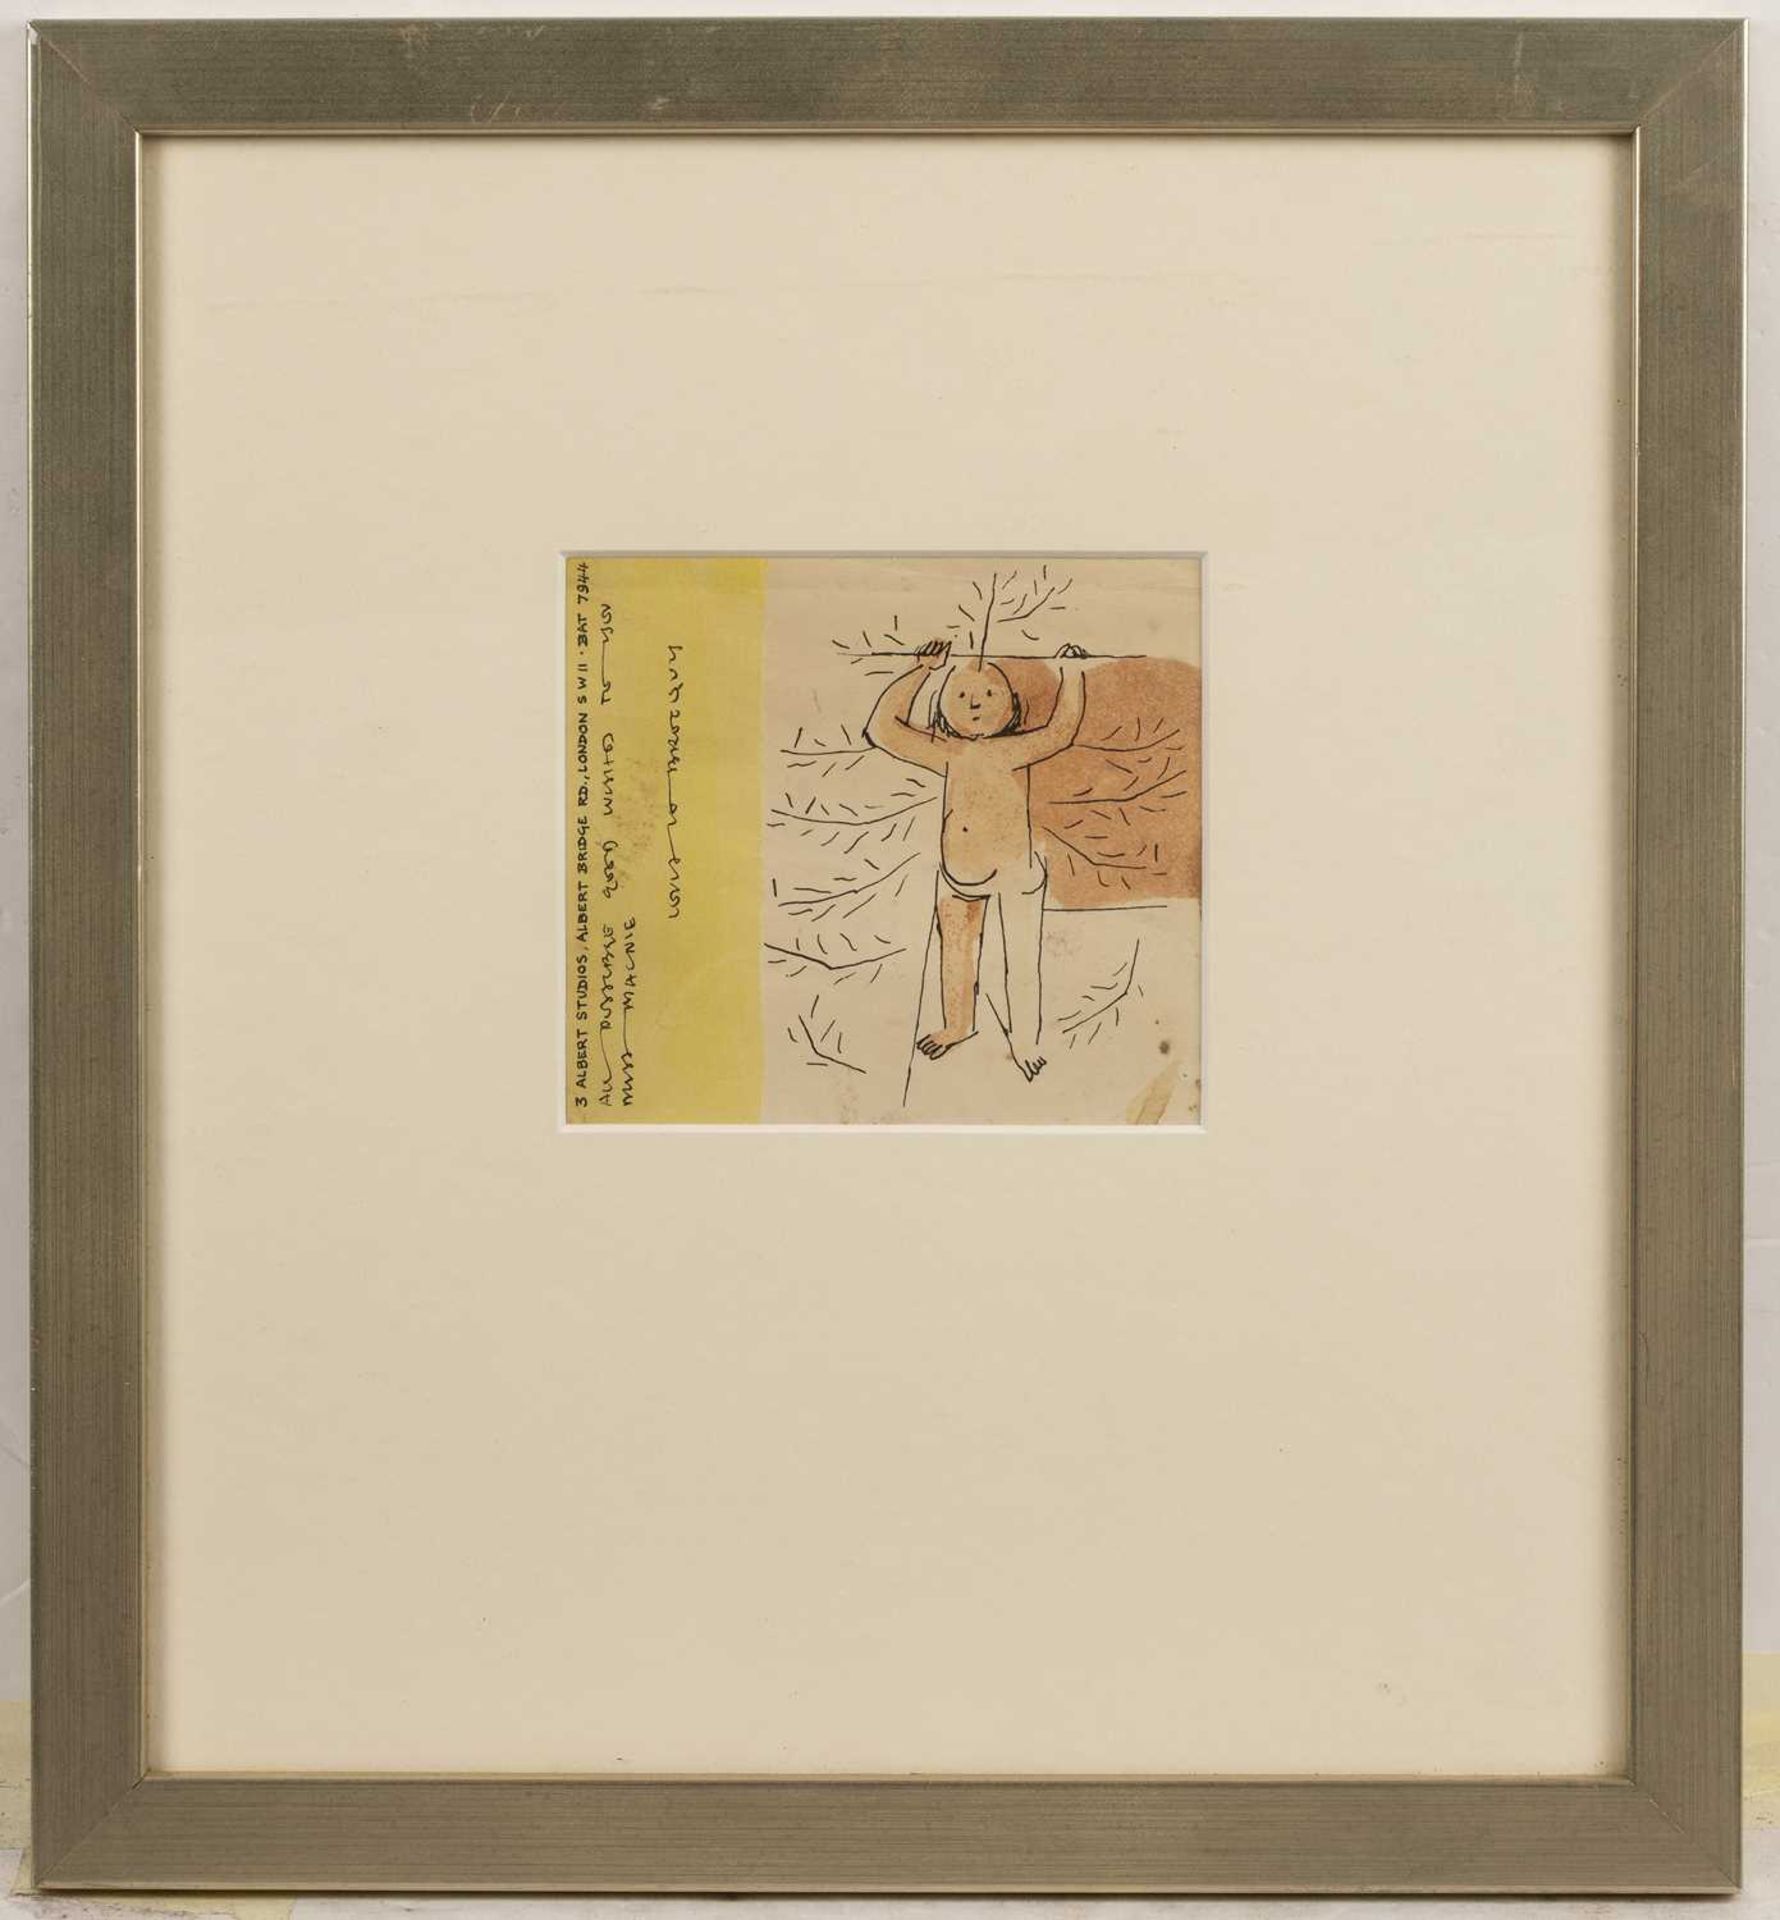 Louis le Brocquy (1916-2012) Study of a Child inscribed and signed watercolour and ink 10 x 11cm. - Image 2 of 3